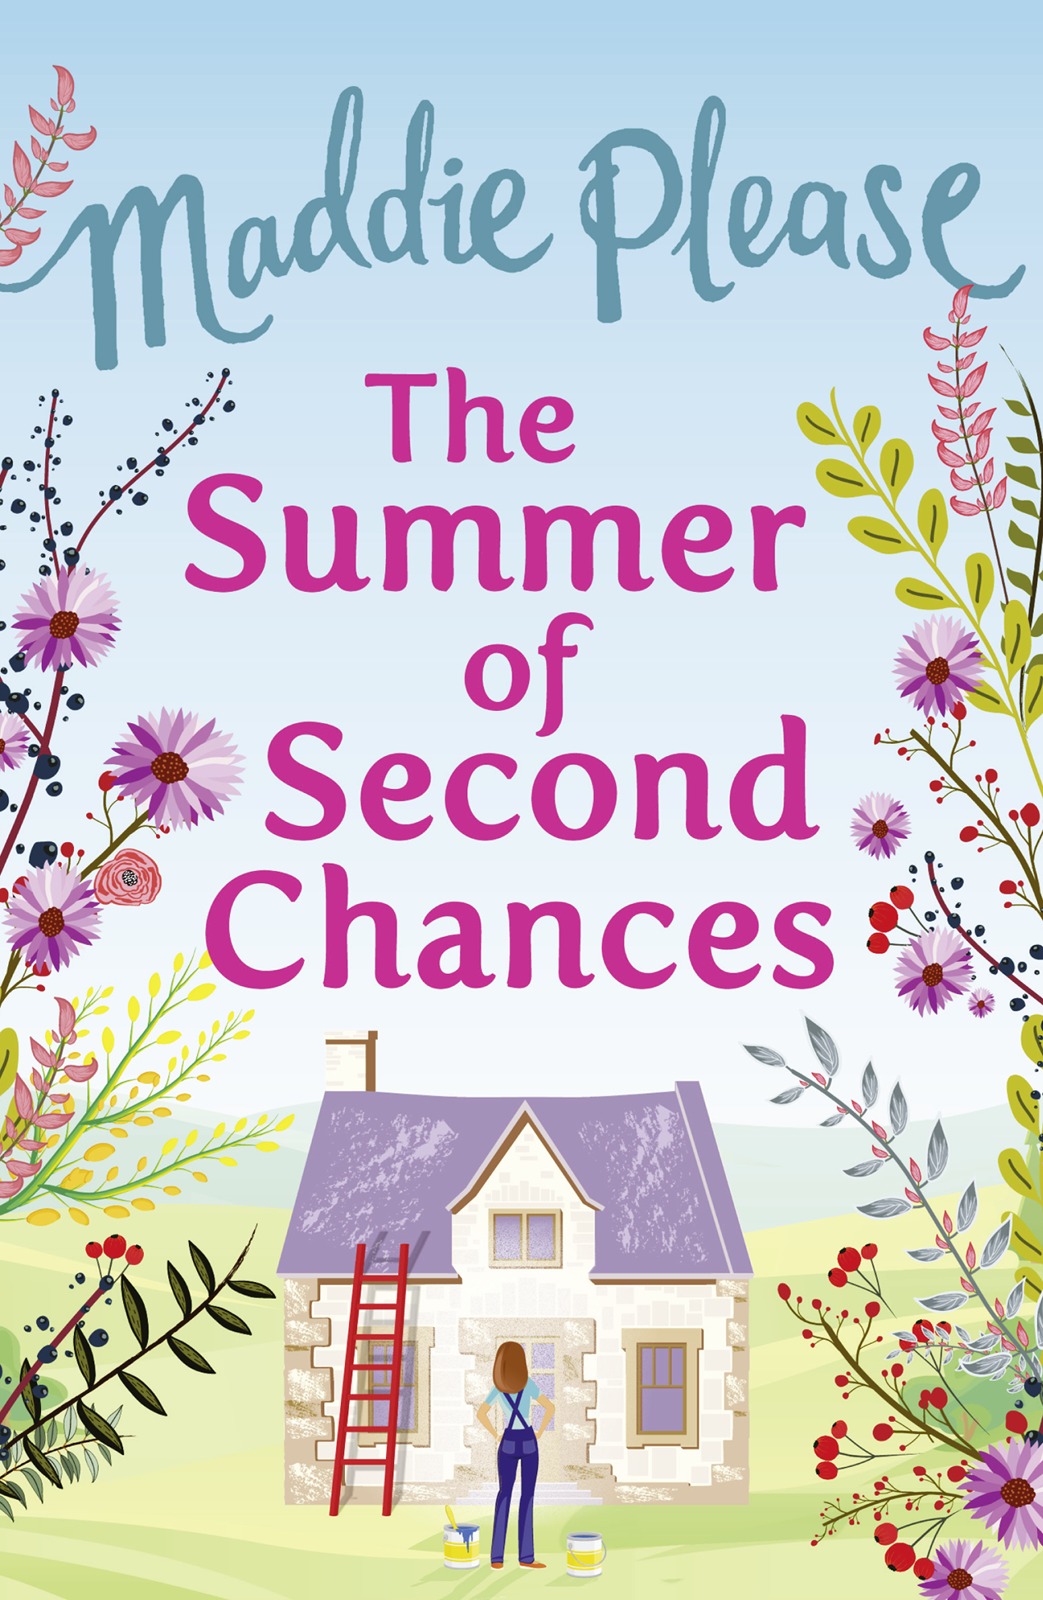 The Summer of Second Chances: The laugh-out-loud romantic comedy